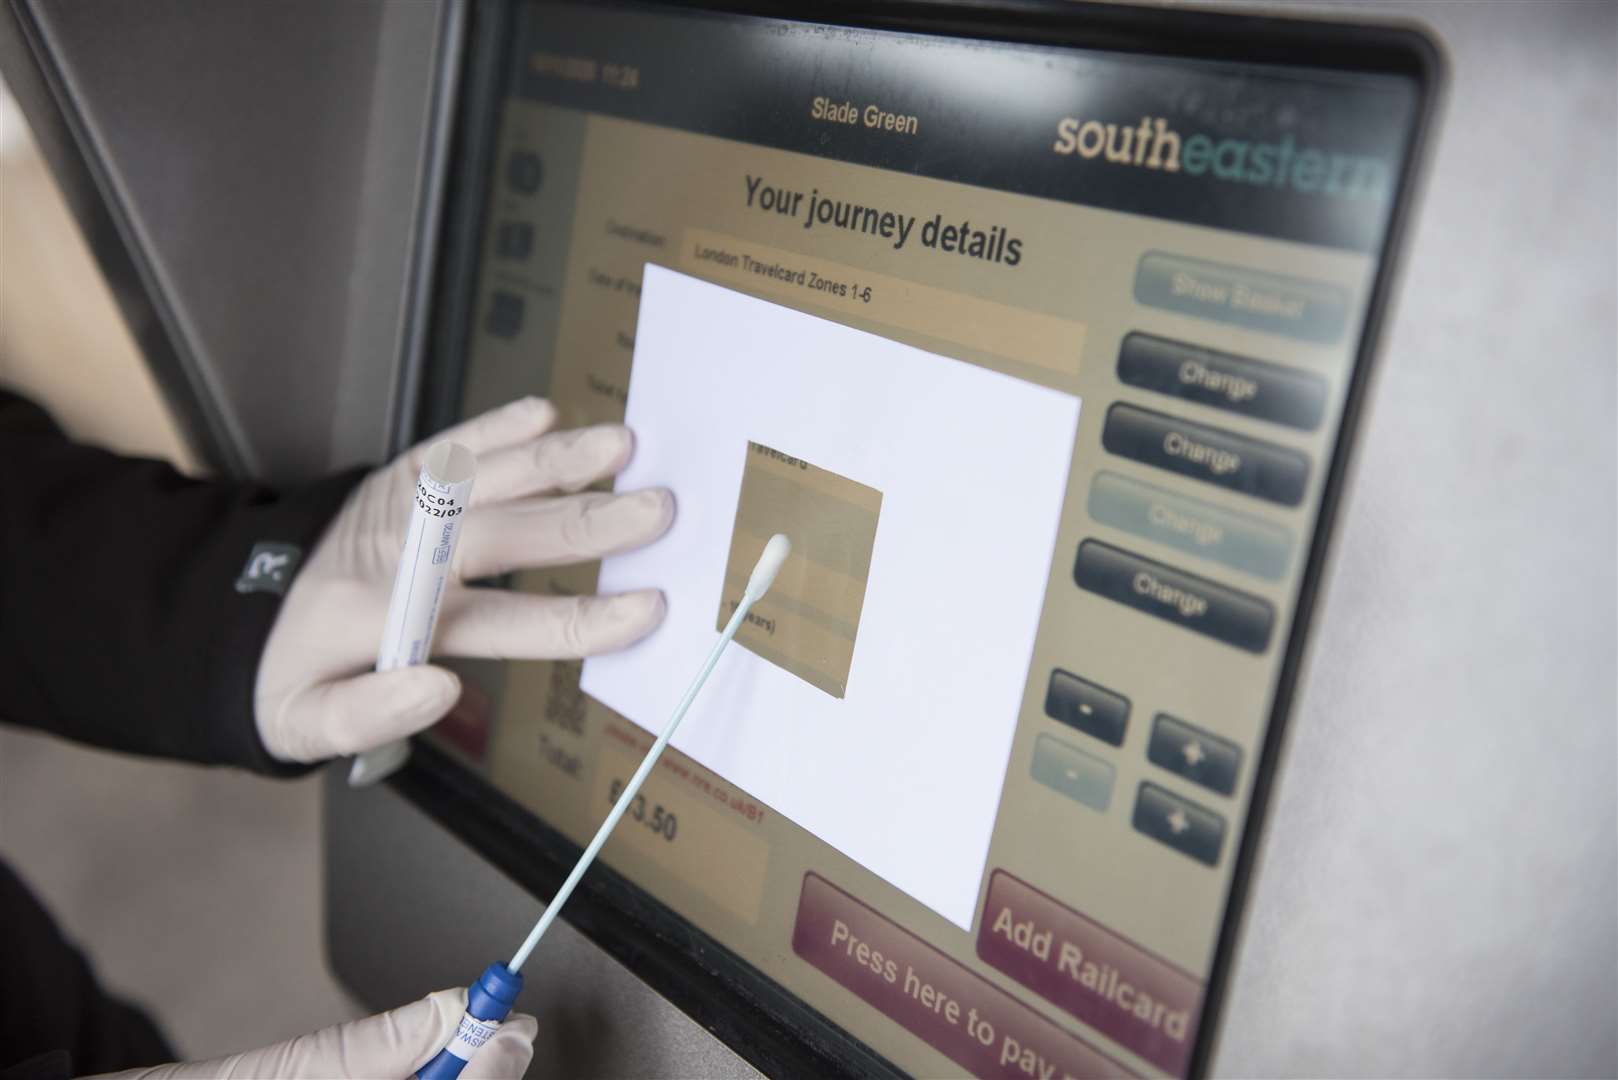 Swabbing a ticket screen at a Southeastern railway station